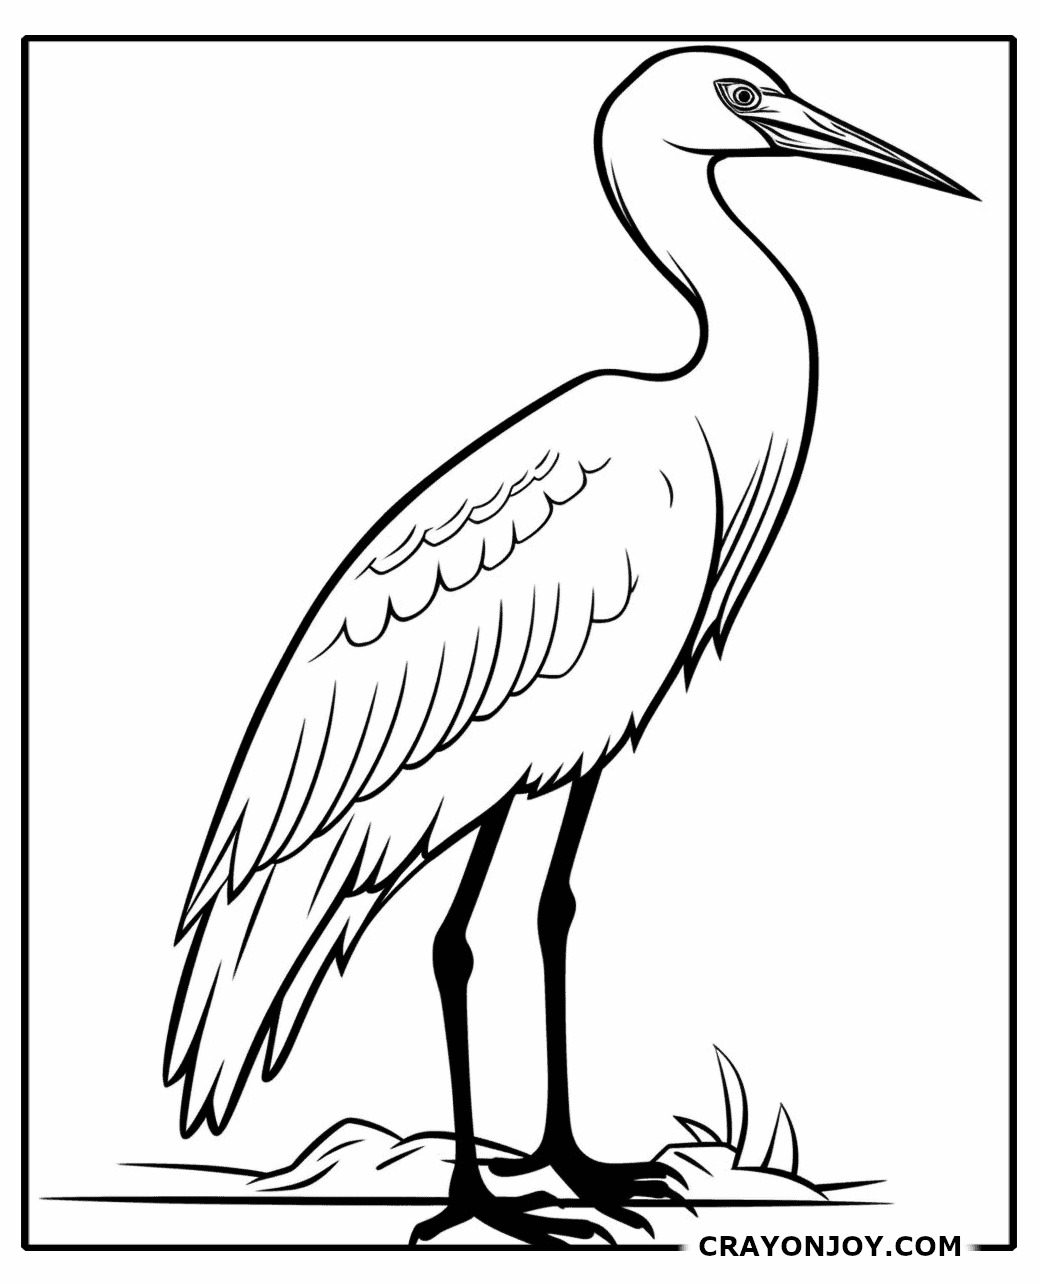 Crane Bird Coloring Pages: Free Printable Sheets for Kids and Adults